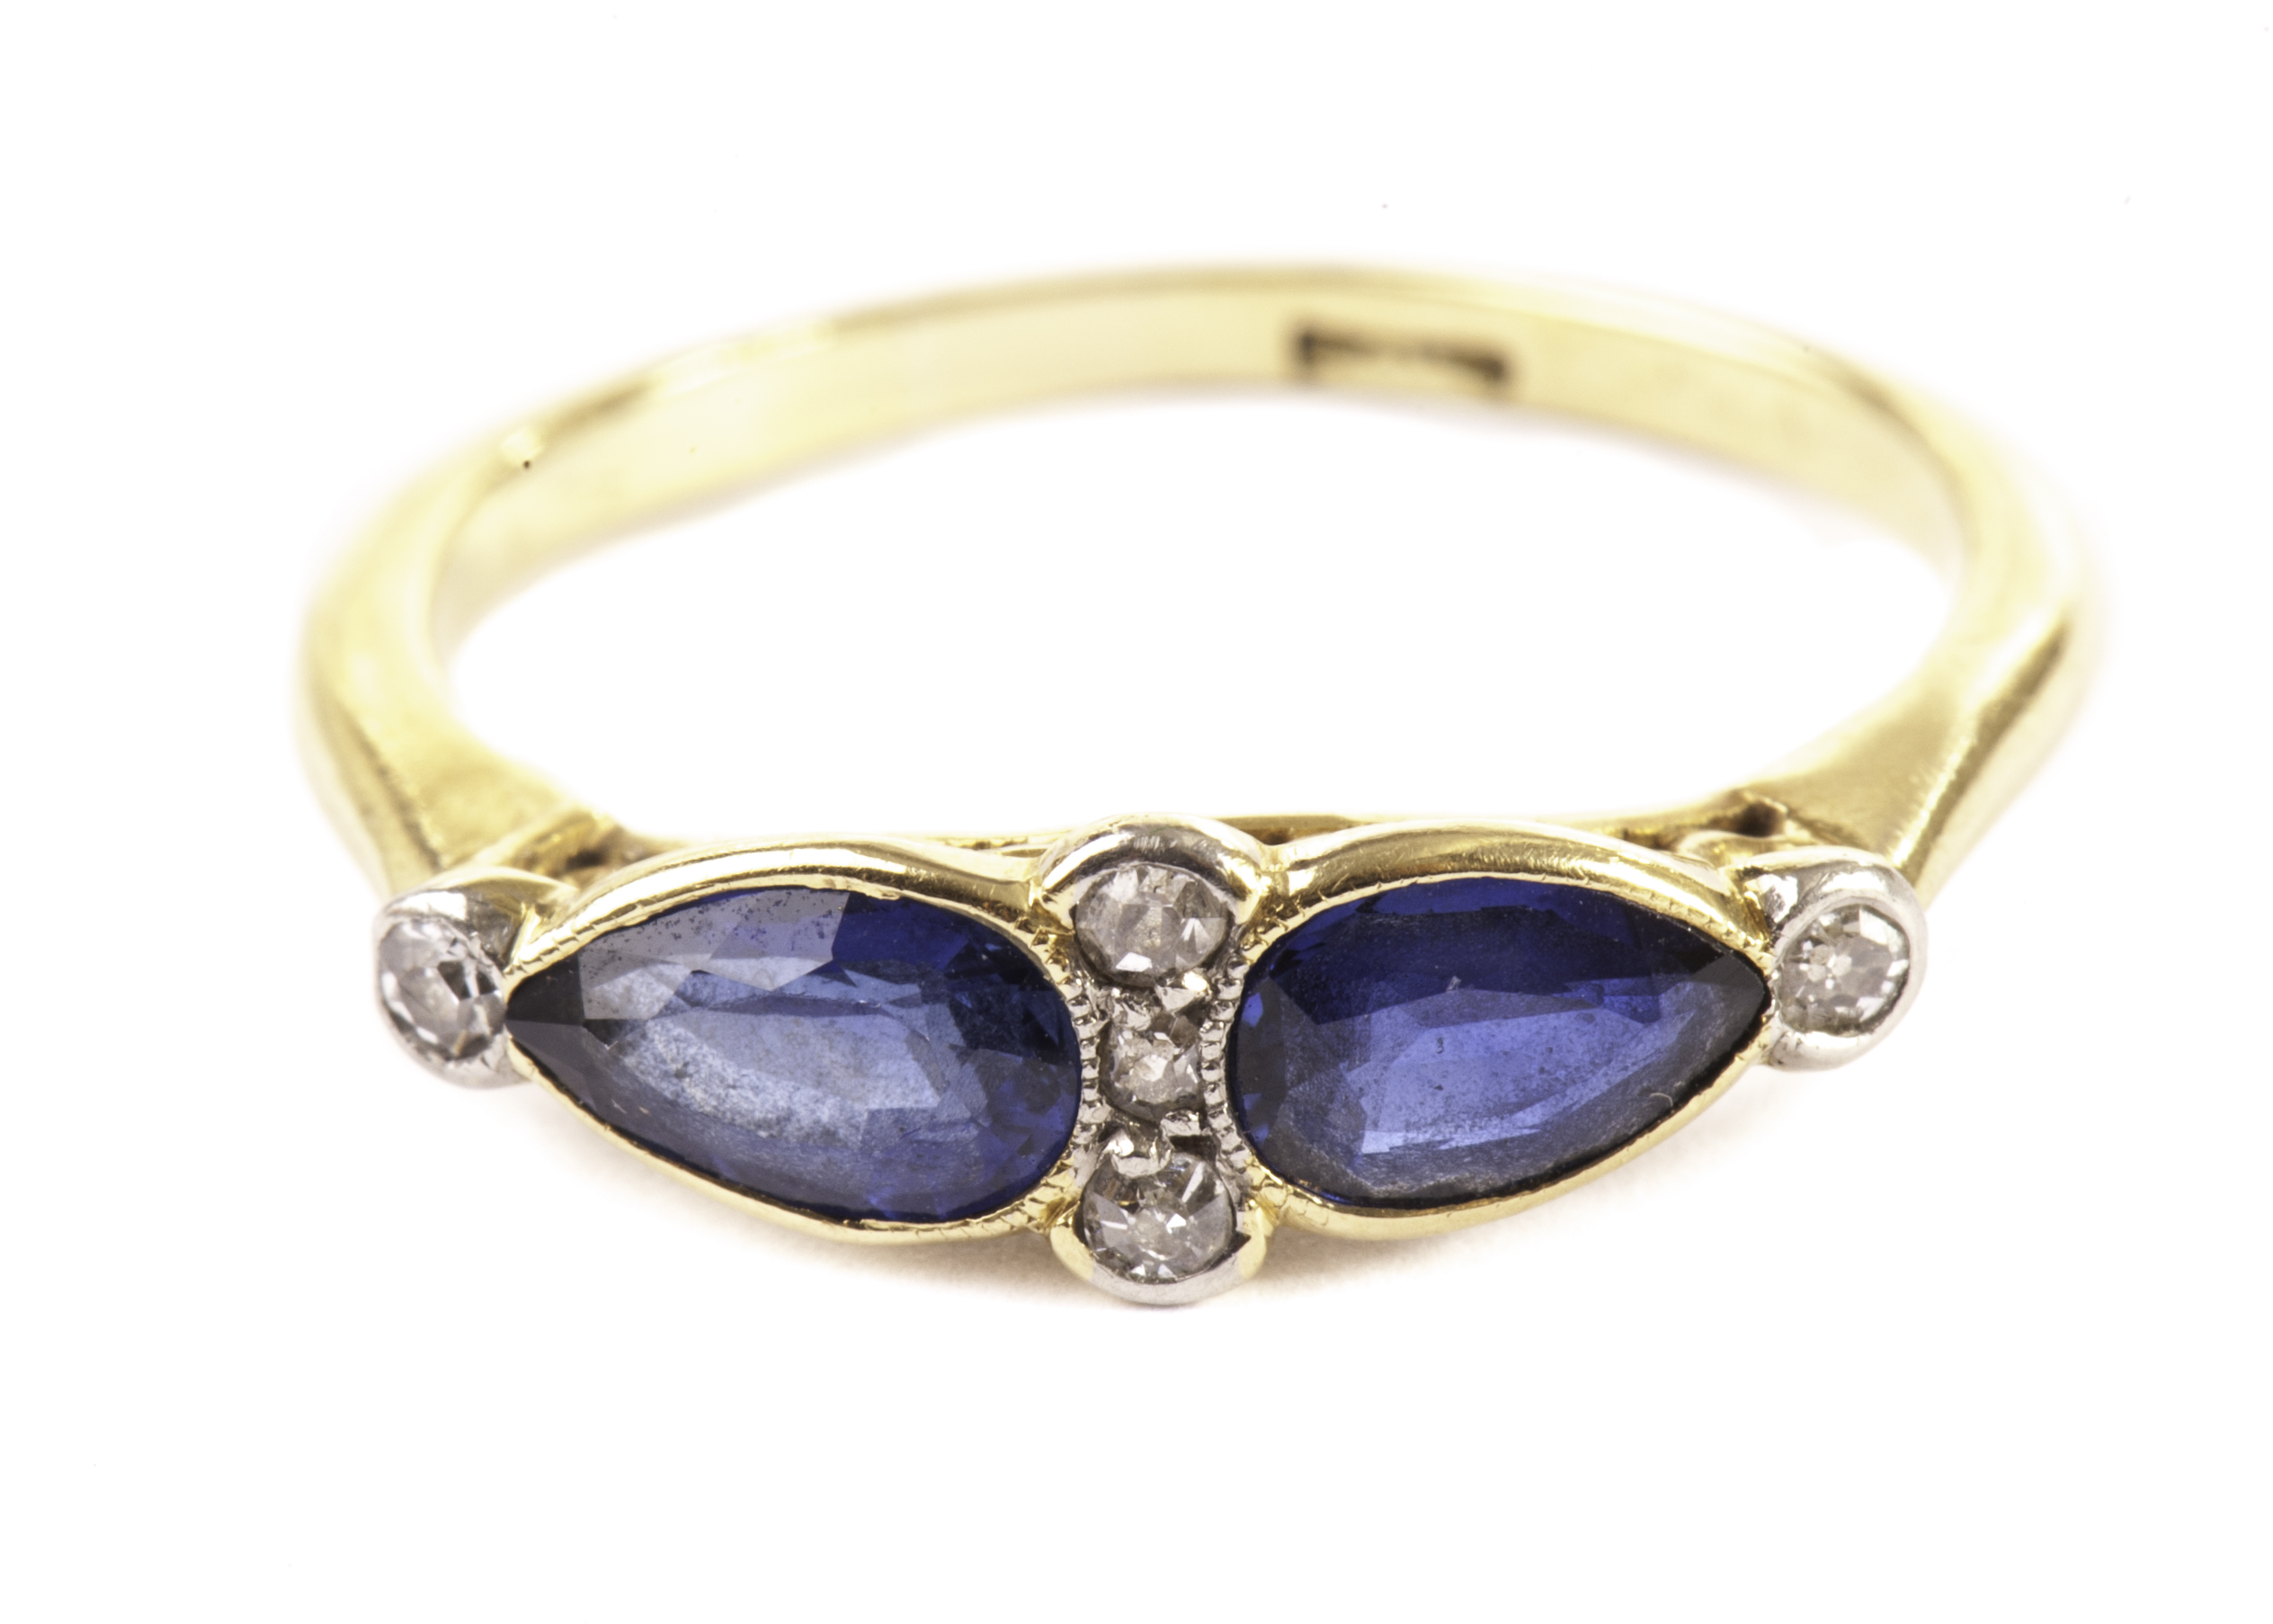 A pretty Edwardian period sapphire and diamond dress ring, having a pair of teardrop shaped good